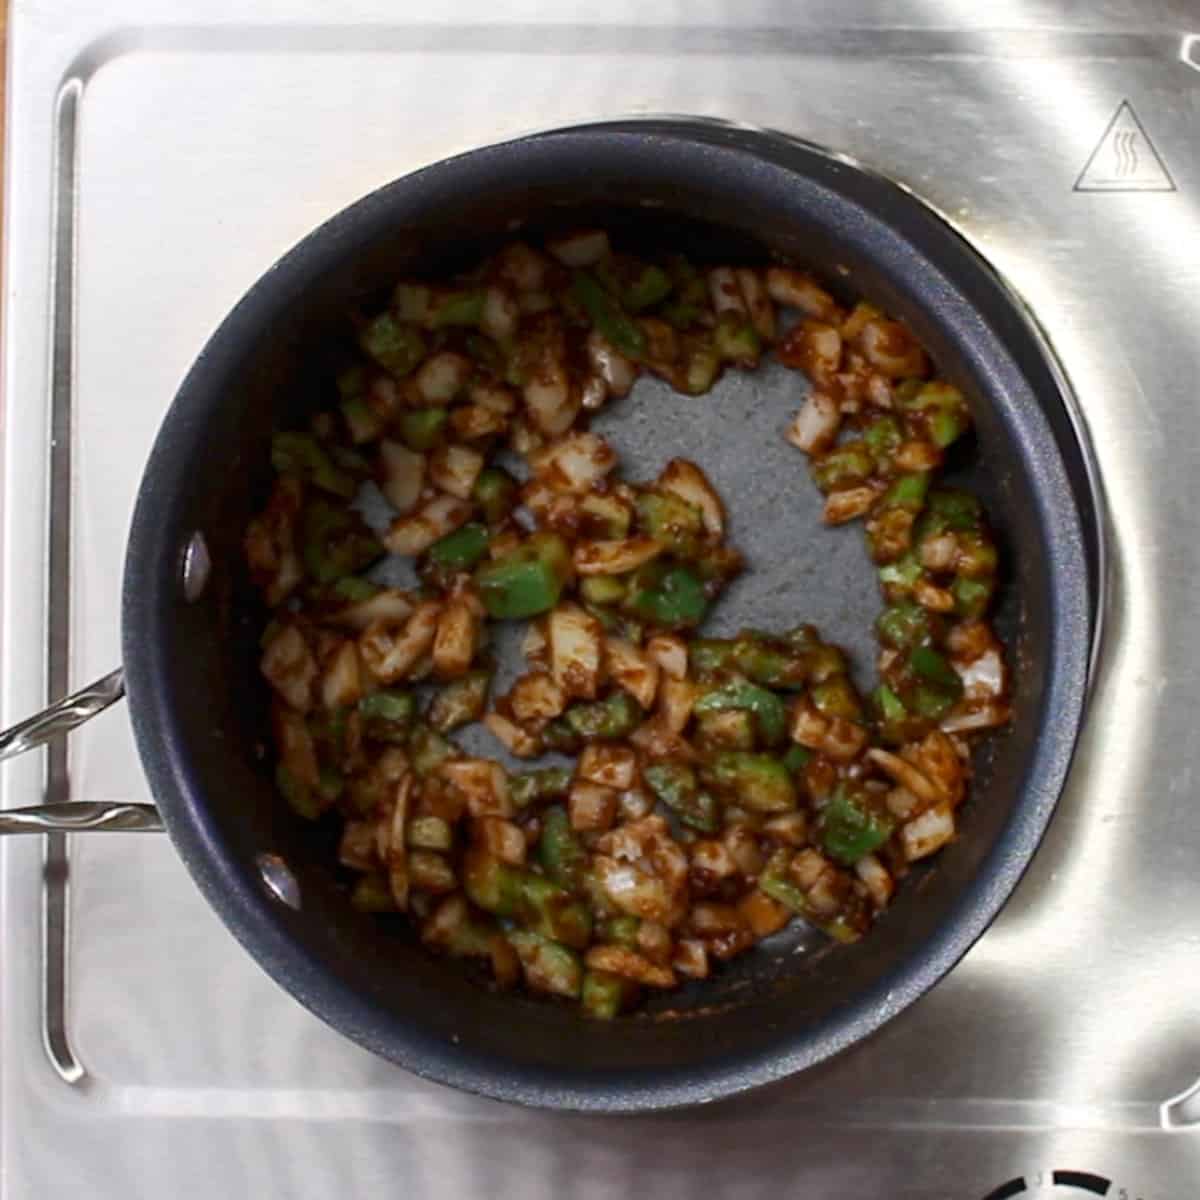 onions, garlic, and bell peppers simmering in roux